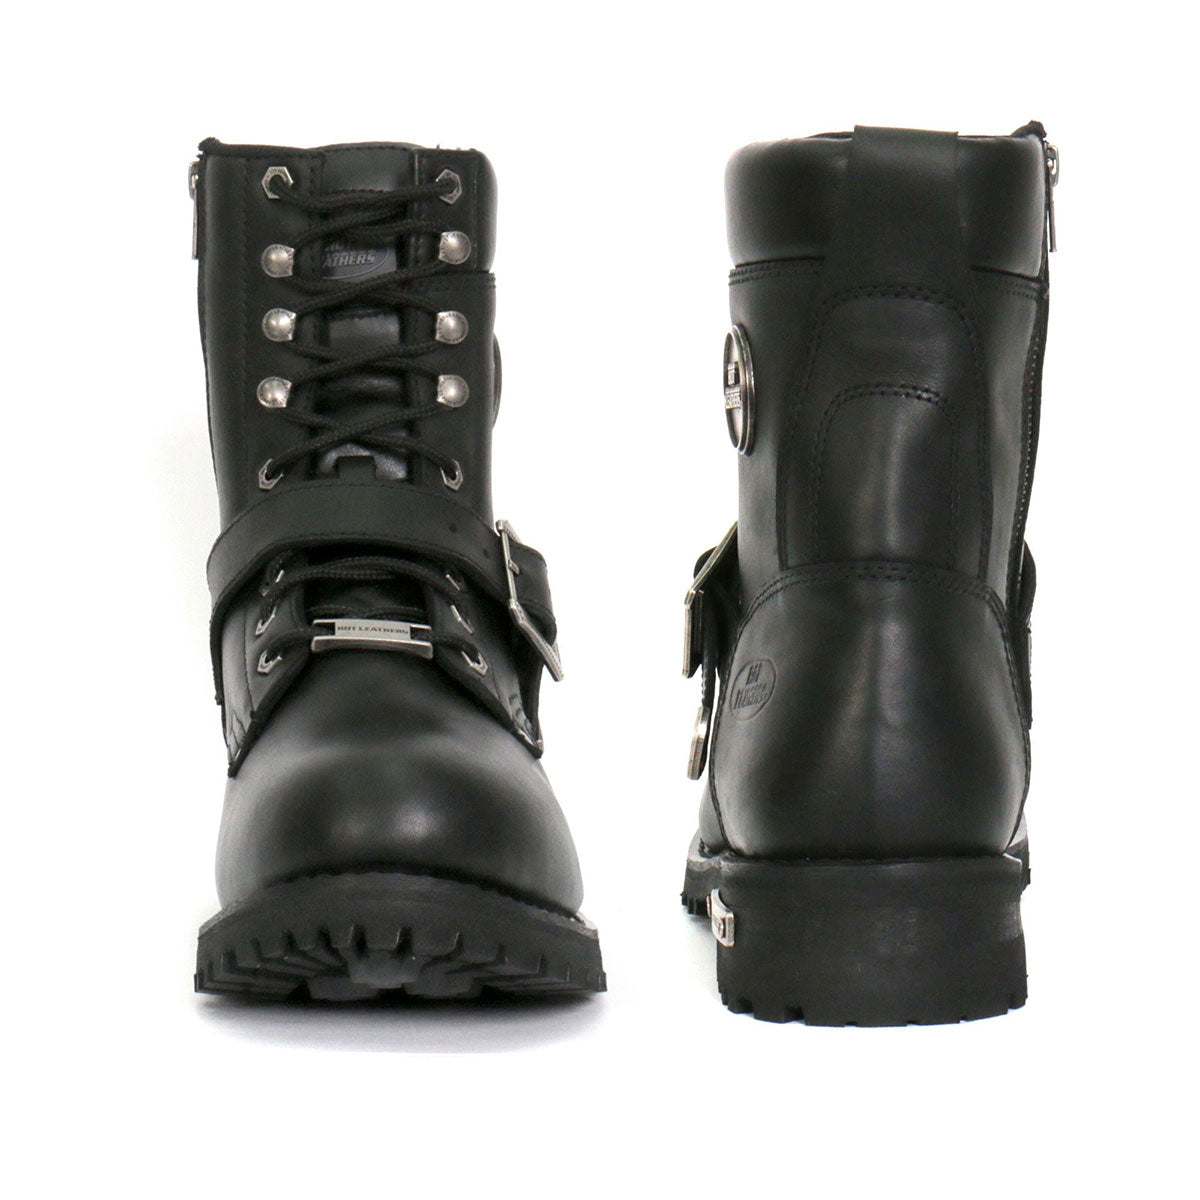 Hot Leathers BTM1006 Men's Wide Width Black 8-inch Logger Leather Boots with Adjustable Buckle